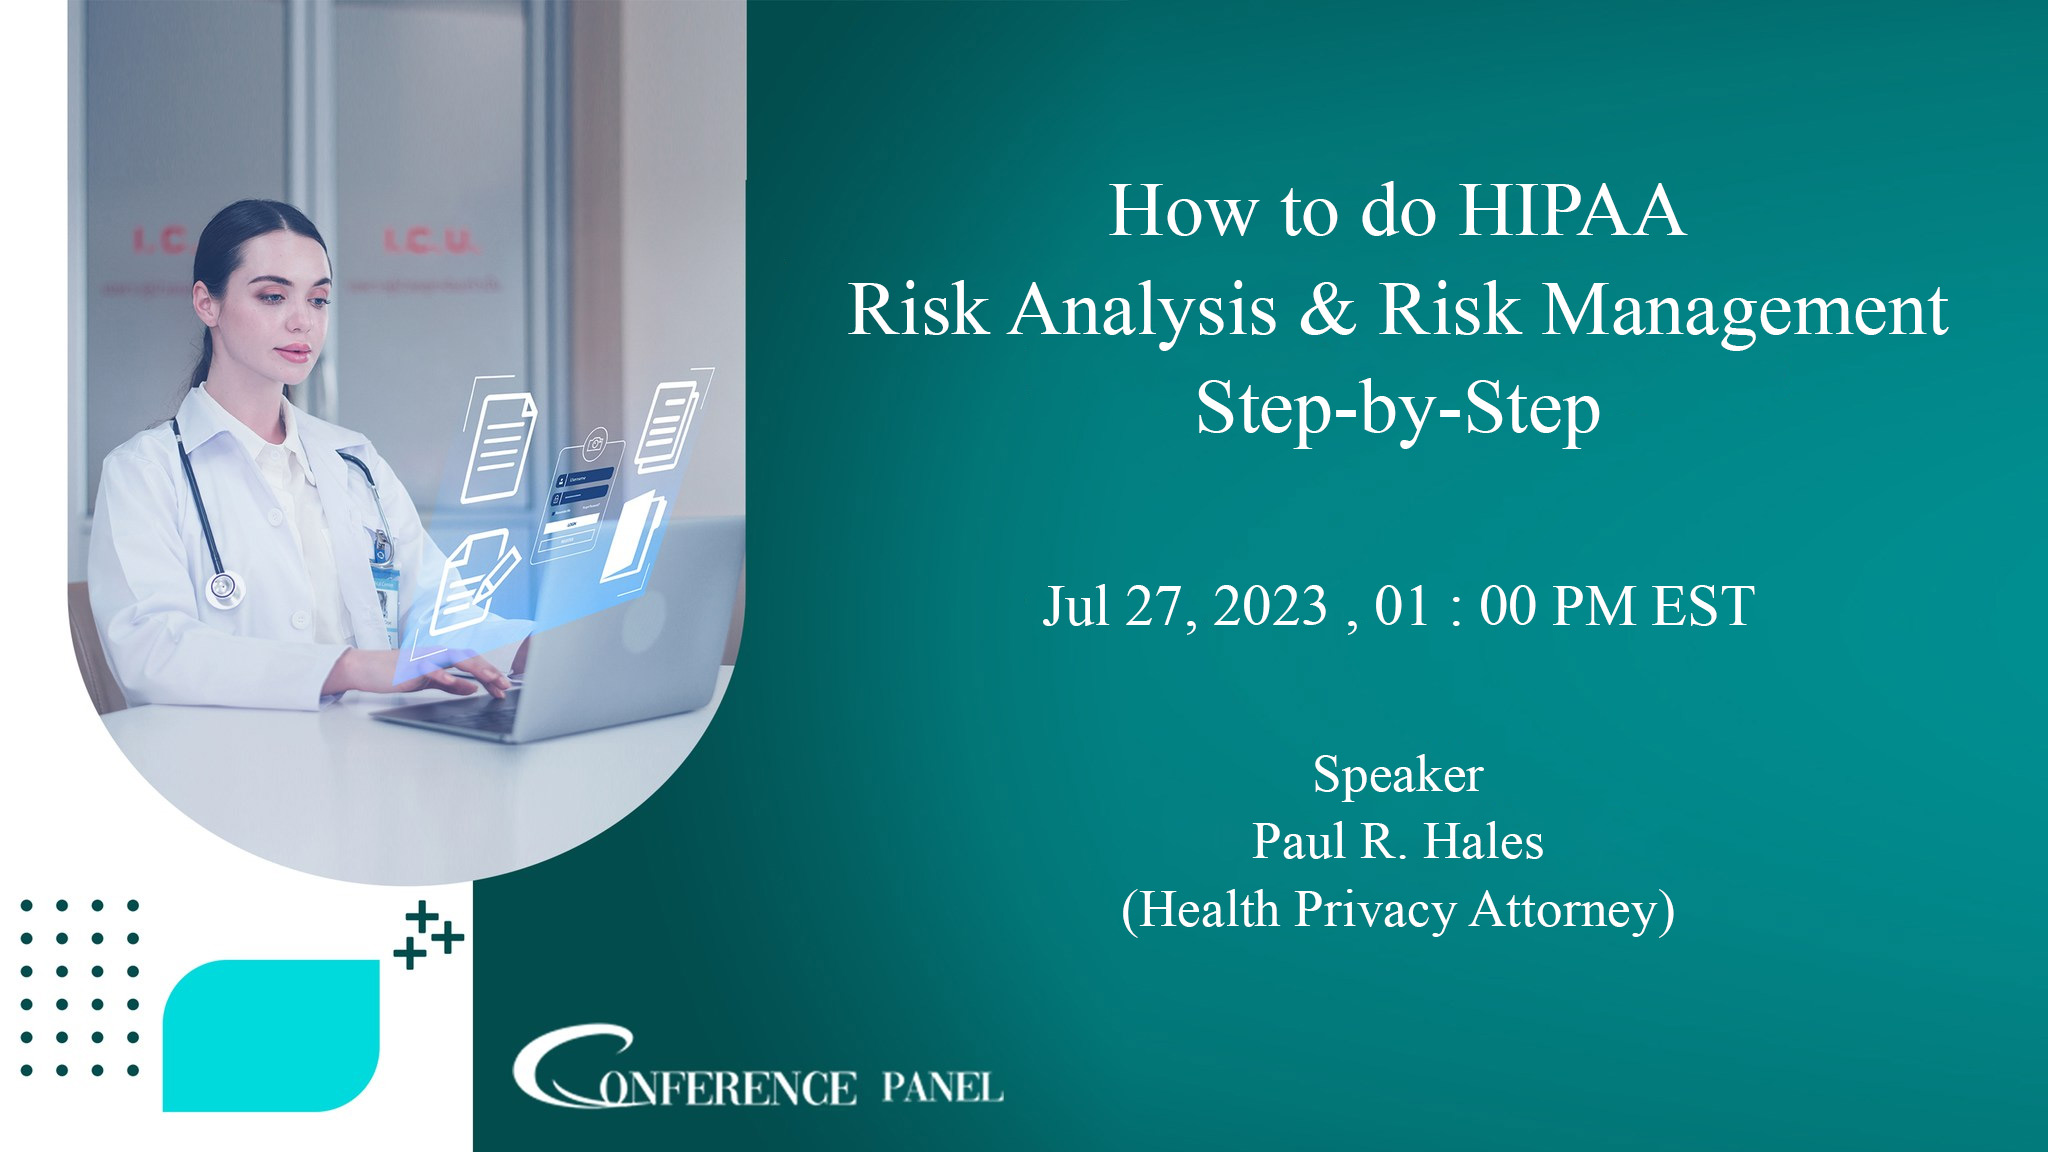 How to do HIPAA Risk Analysis & Risk Management, Online Event